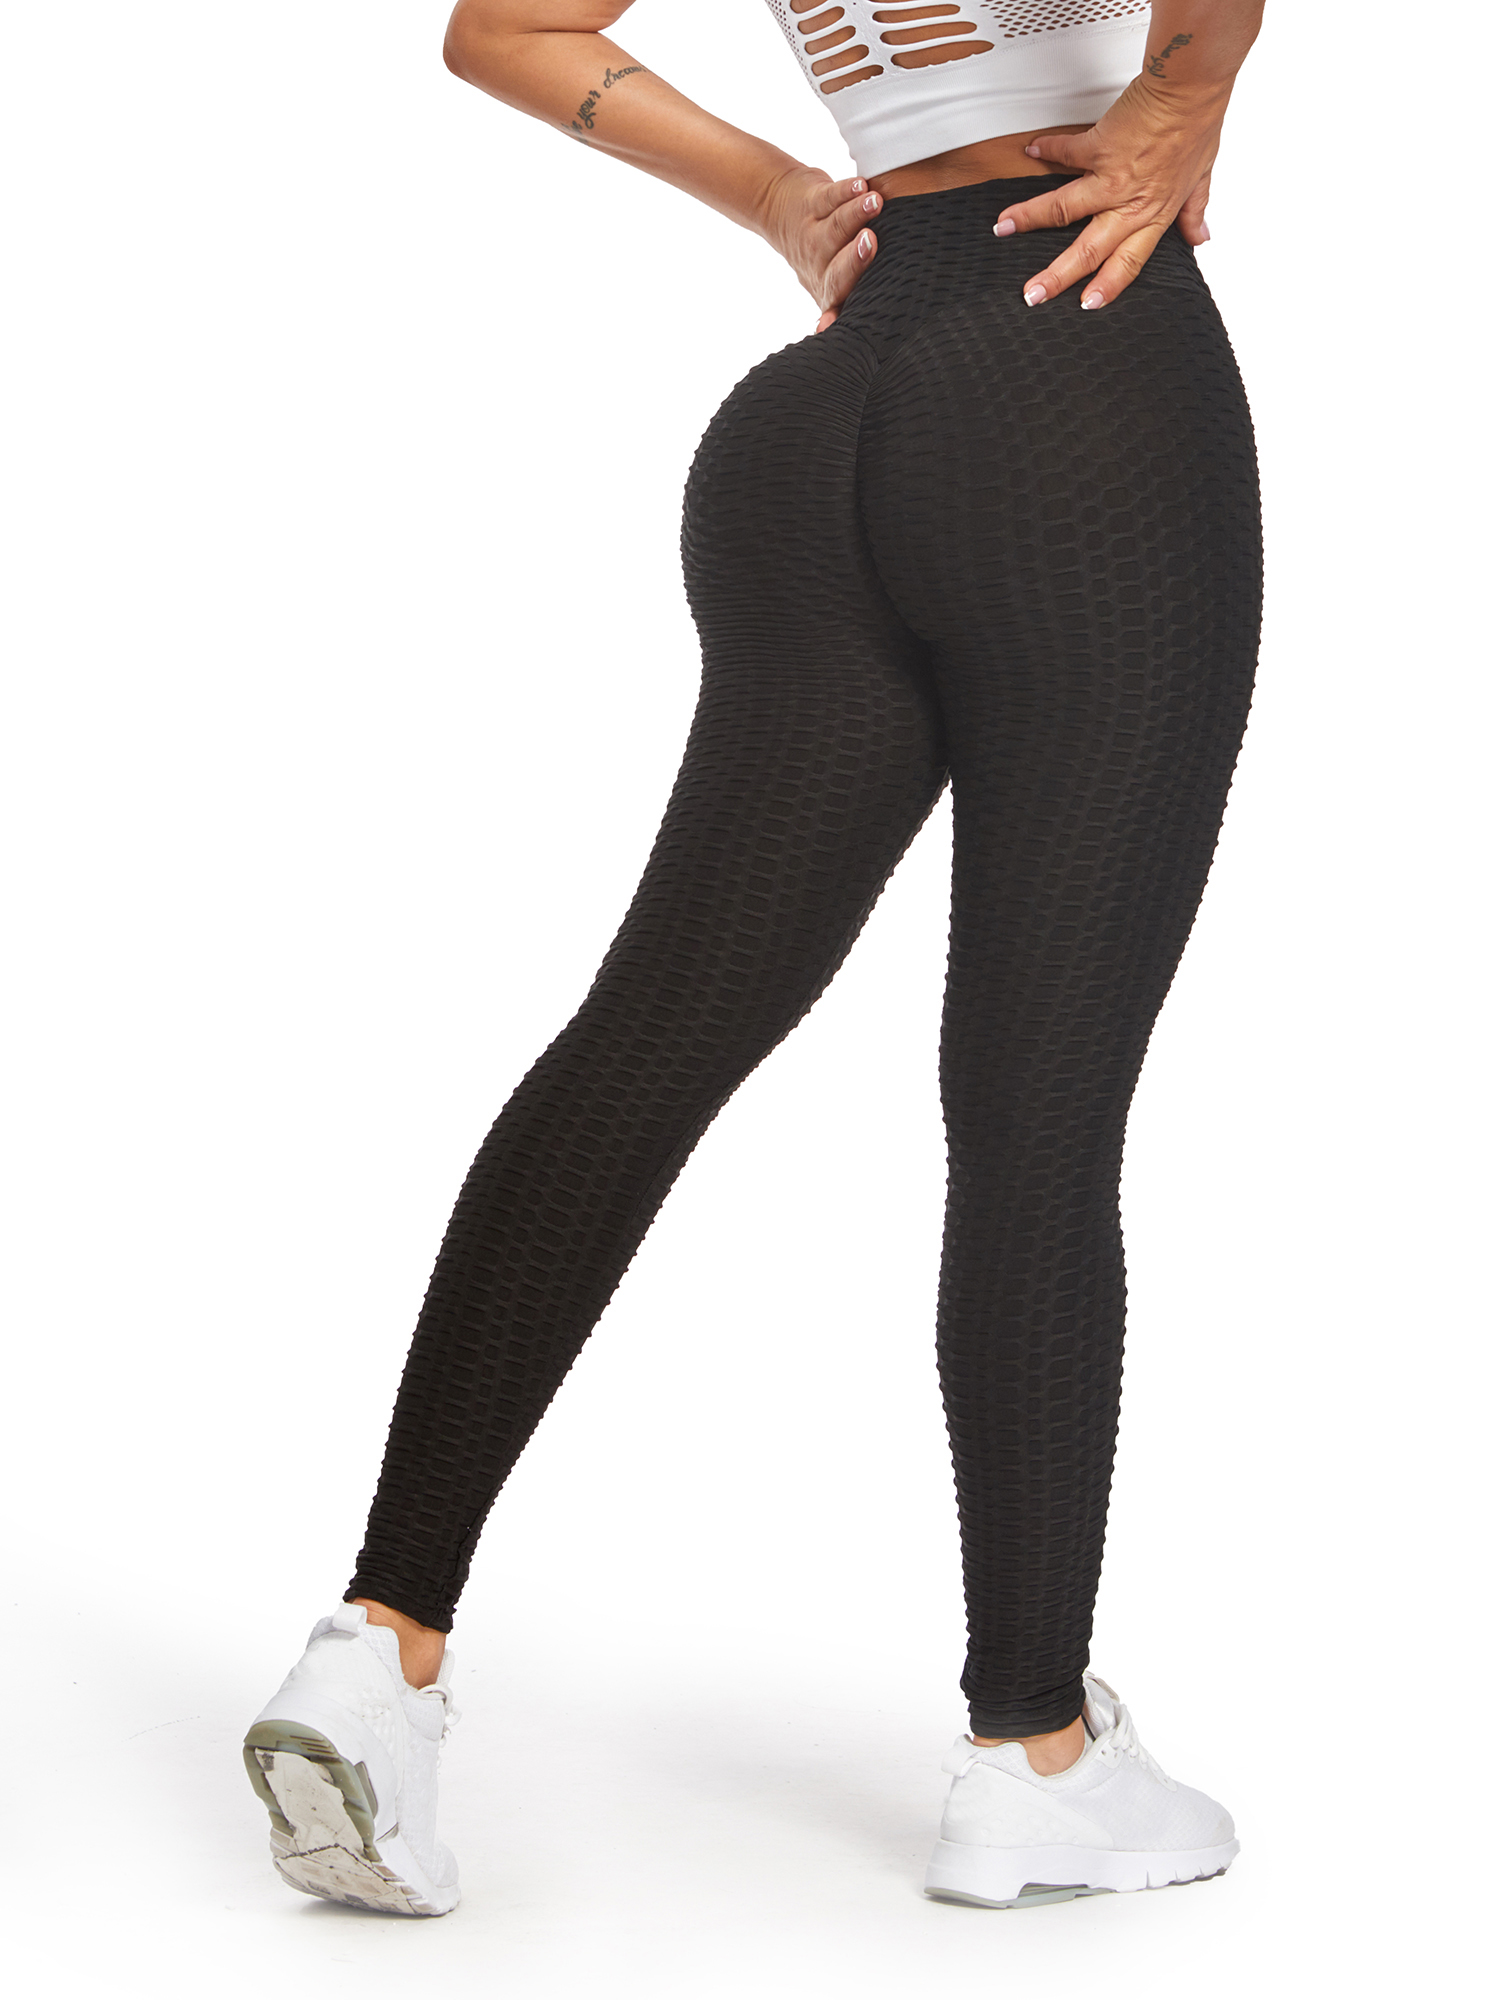 Tummy Control Yoga Pants,High waist butt lift yoga pants, tights with  pockets fitness pants,M,XL,High Waisted Leggings for Women